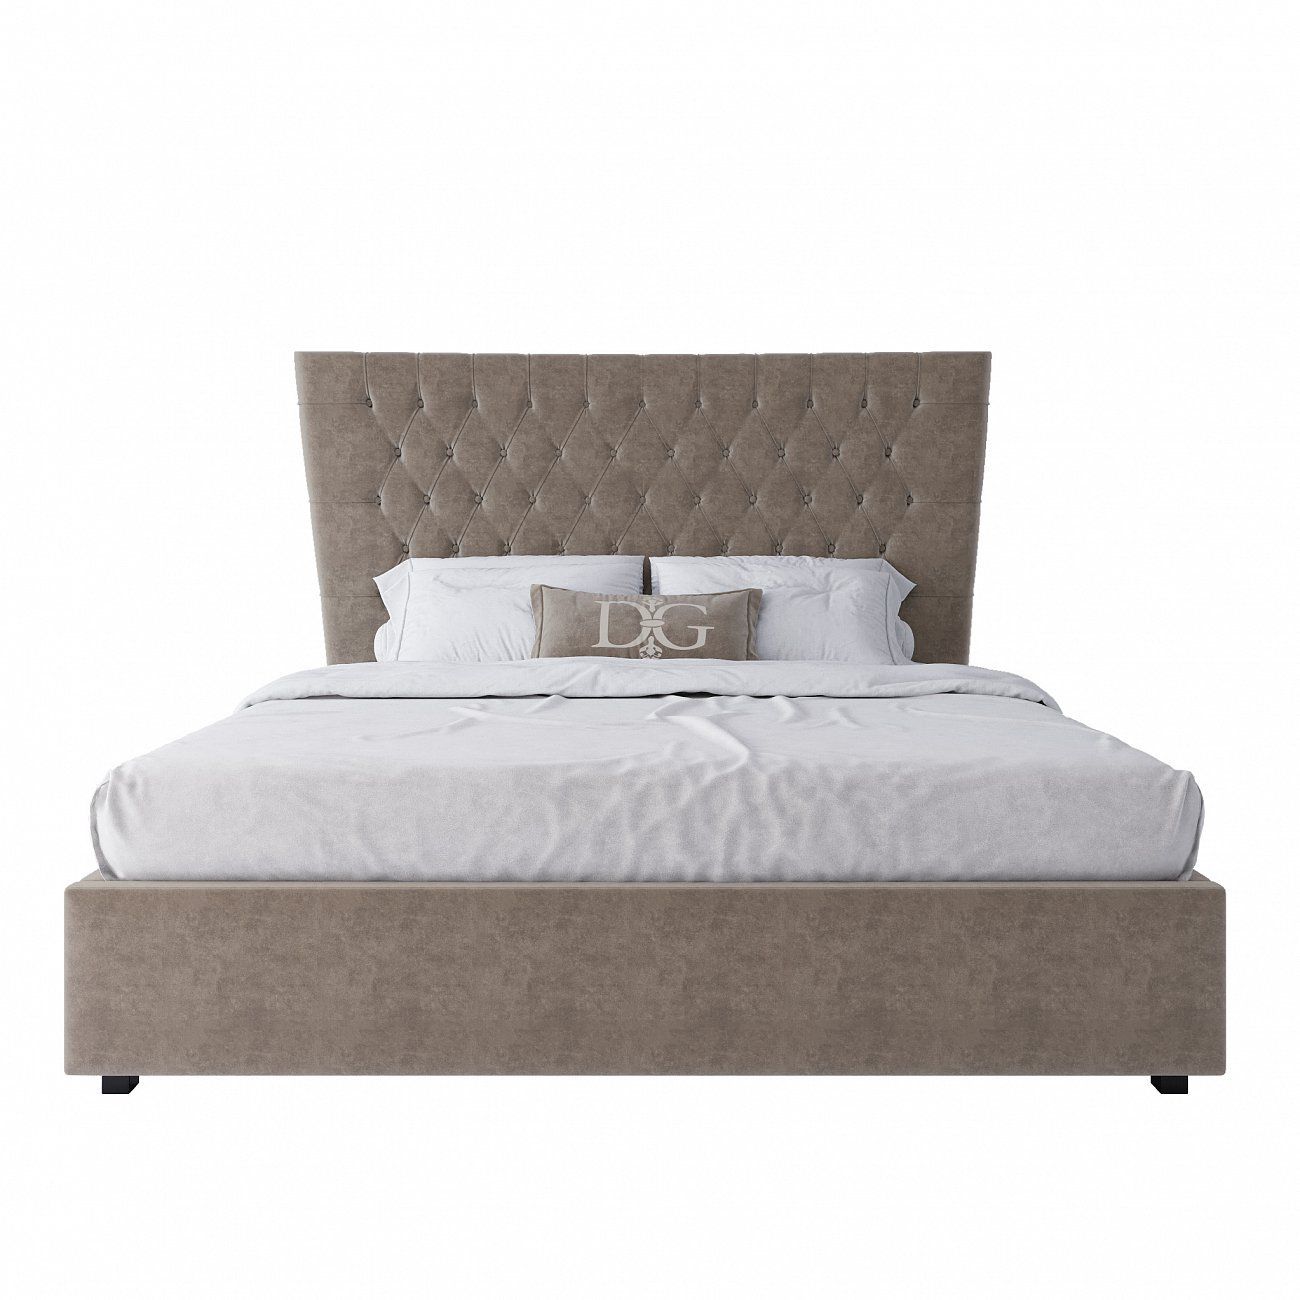 Double bed with upholstered headboard 180x200 cm beige QuickSand